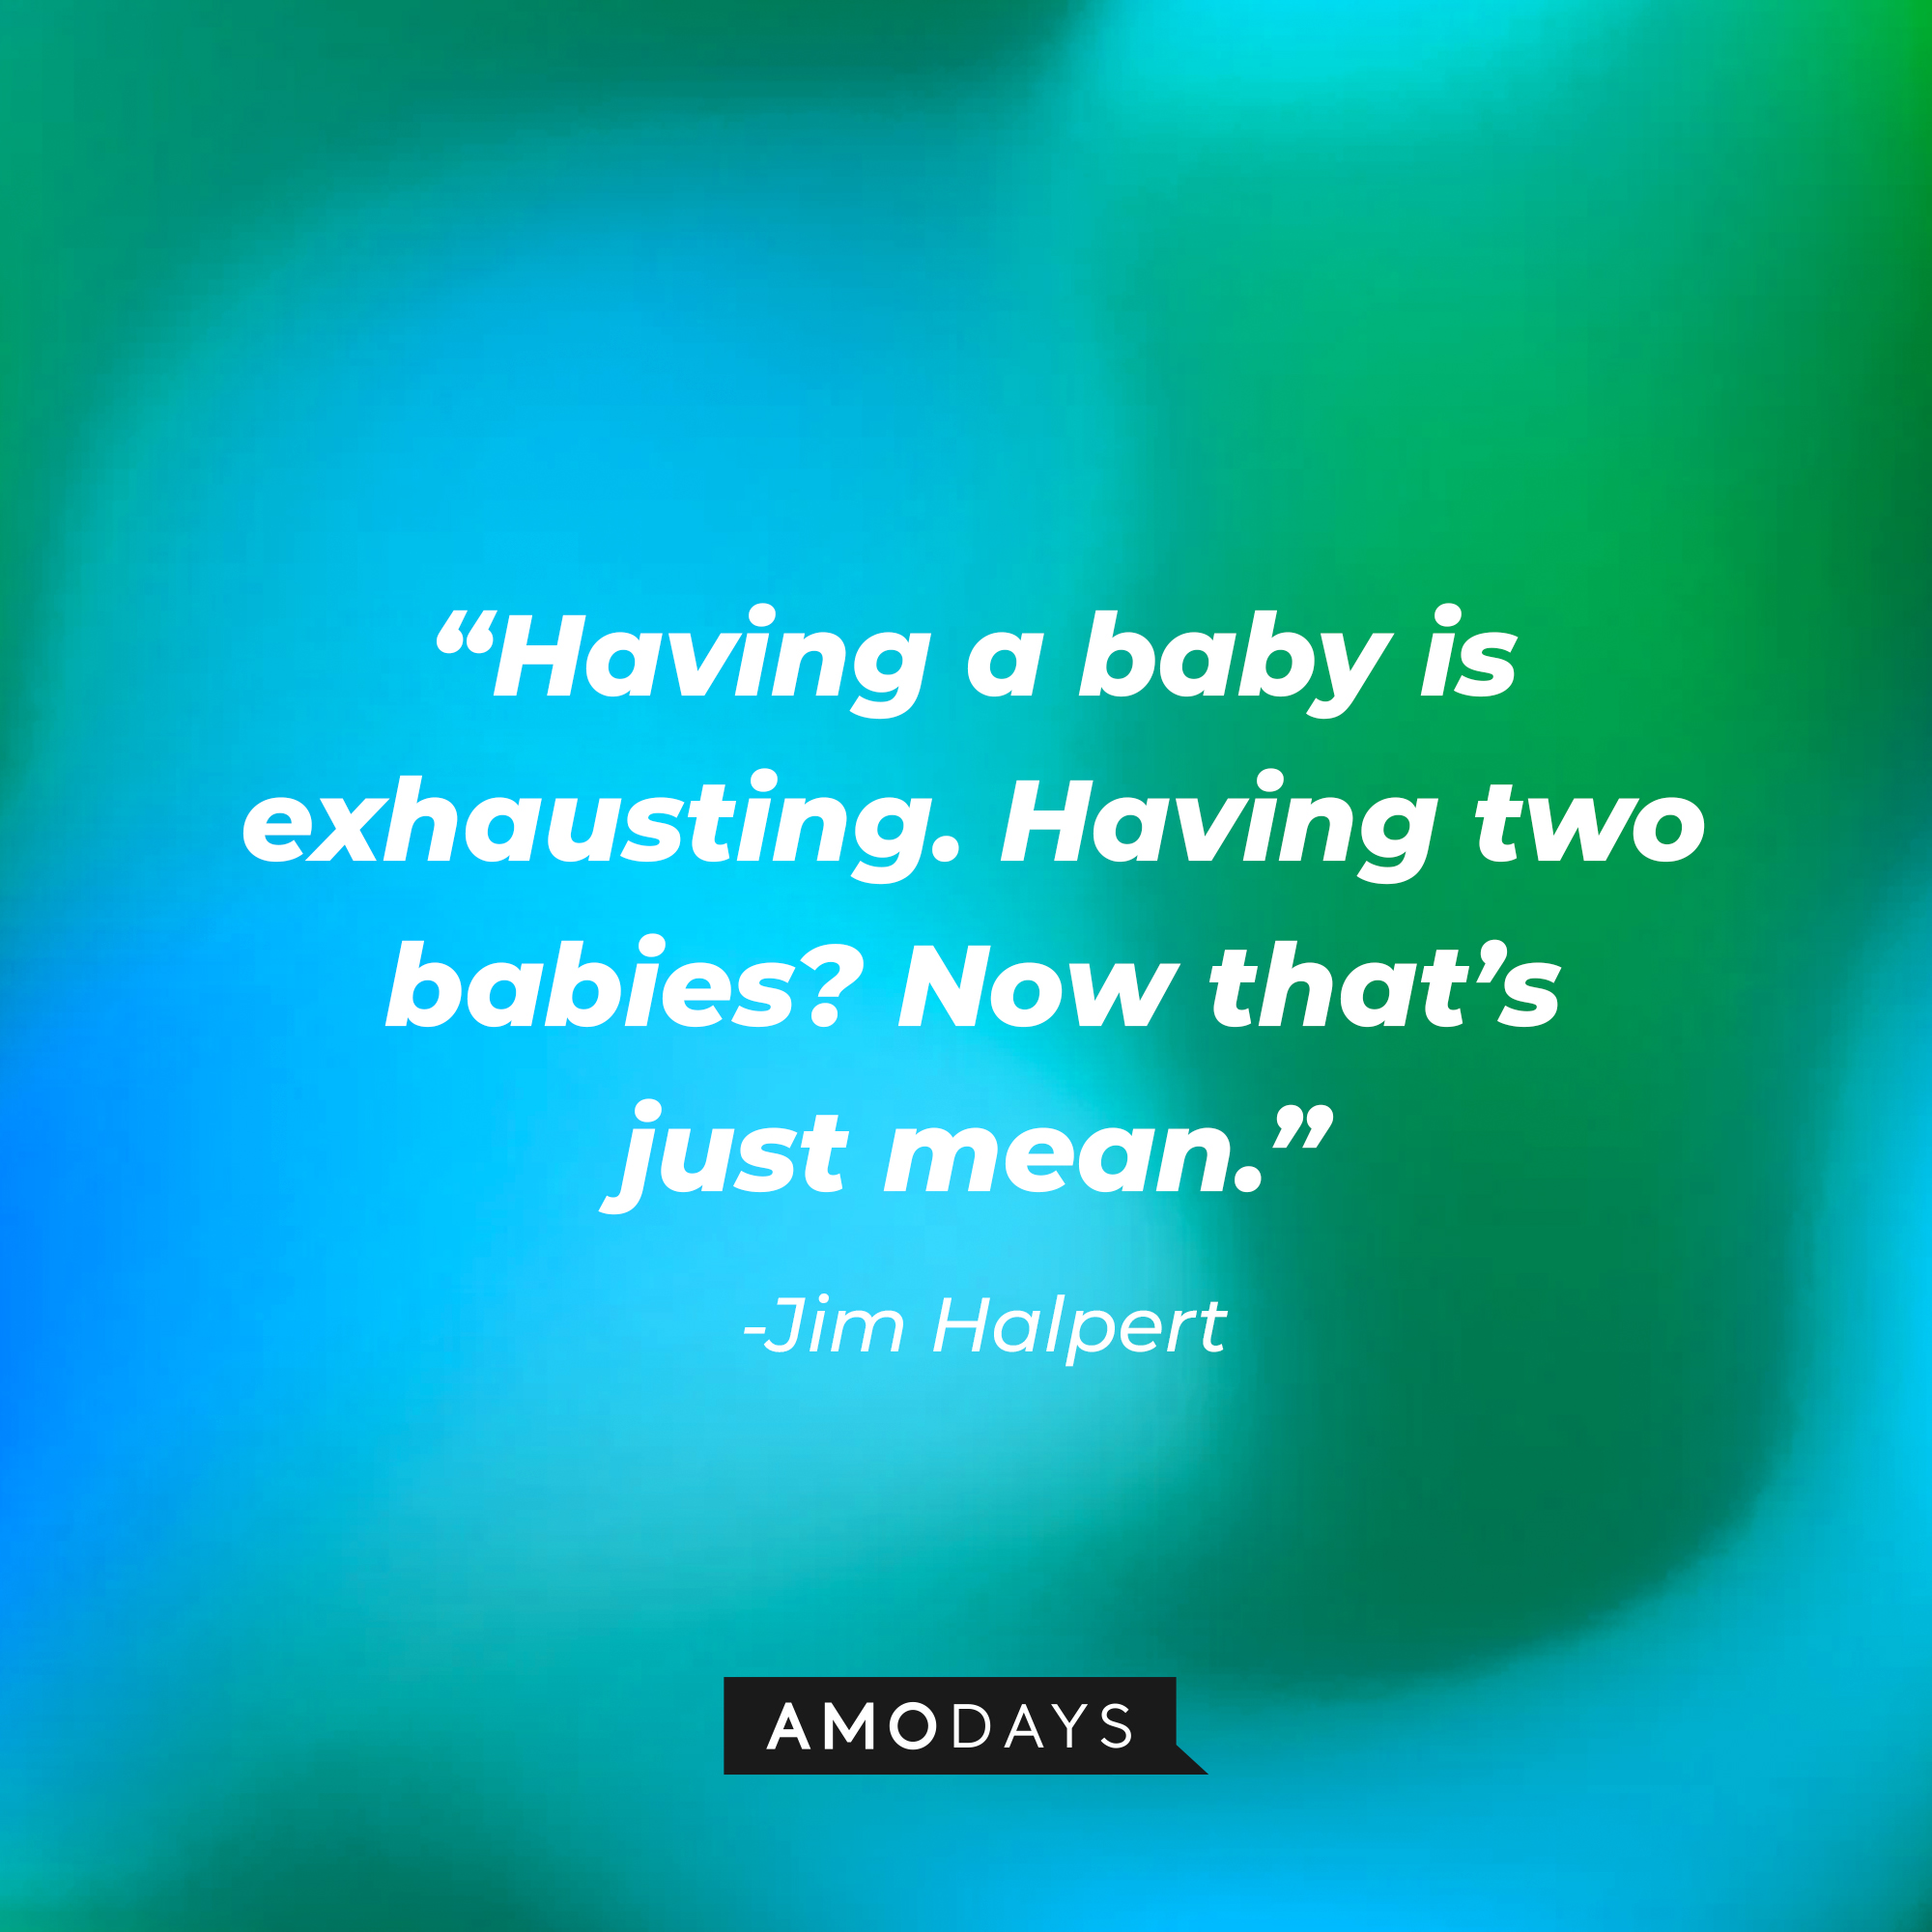 Jim Halpert’s quote: "Having a baby is exhausting. Having two babies? Now that’s just mean." | Source: AmoDays